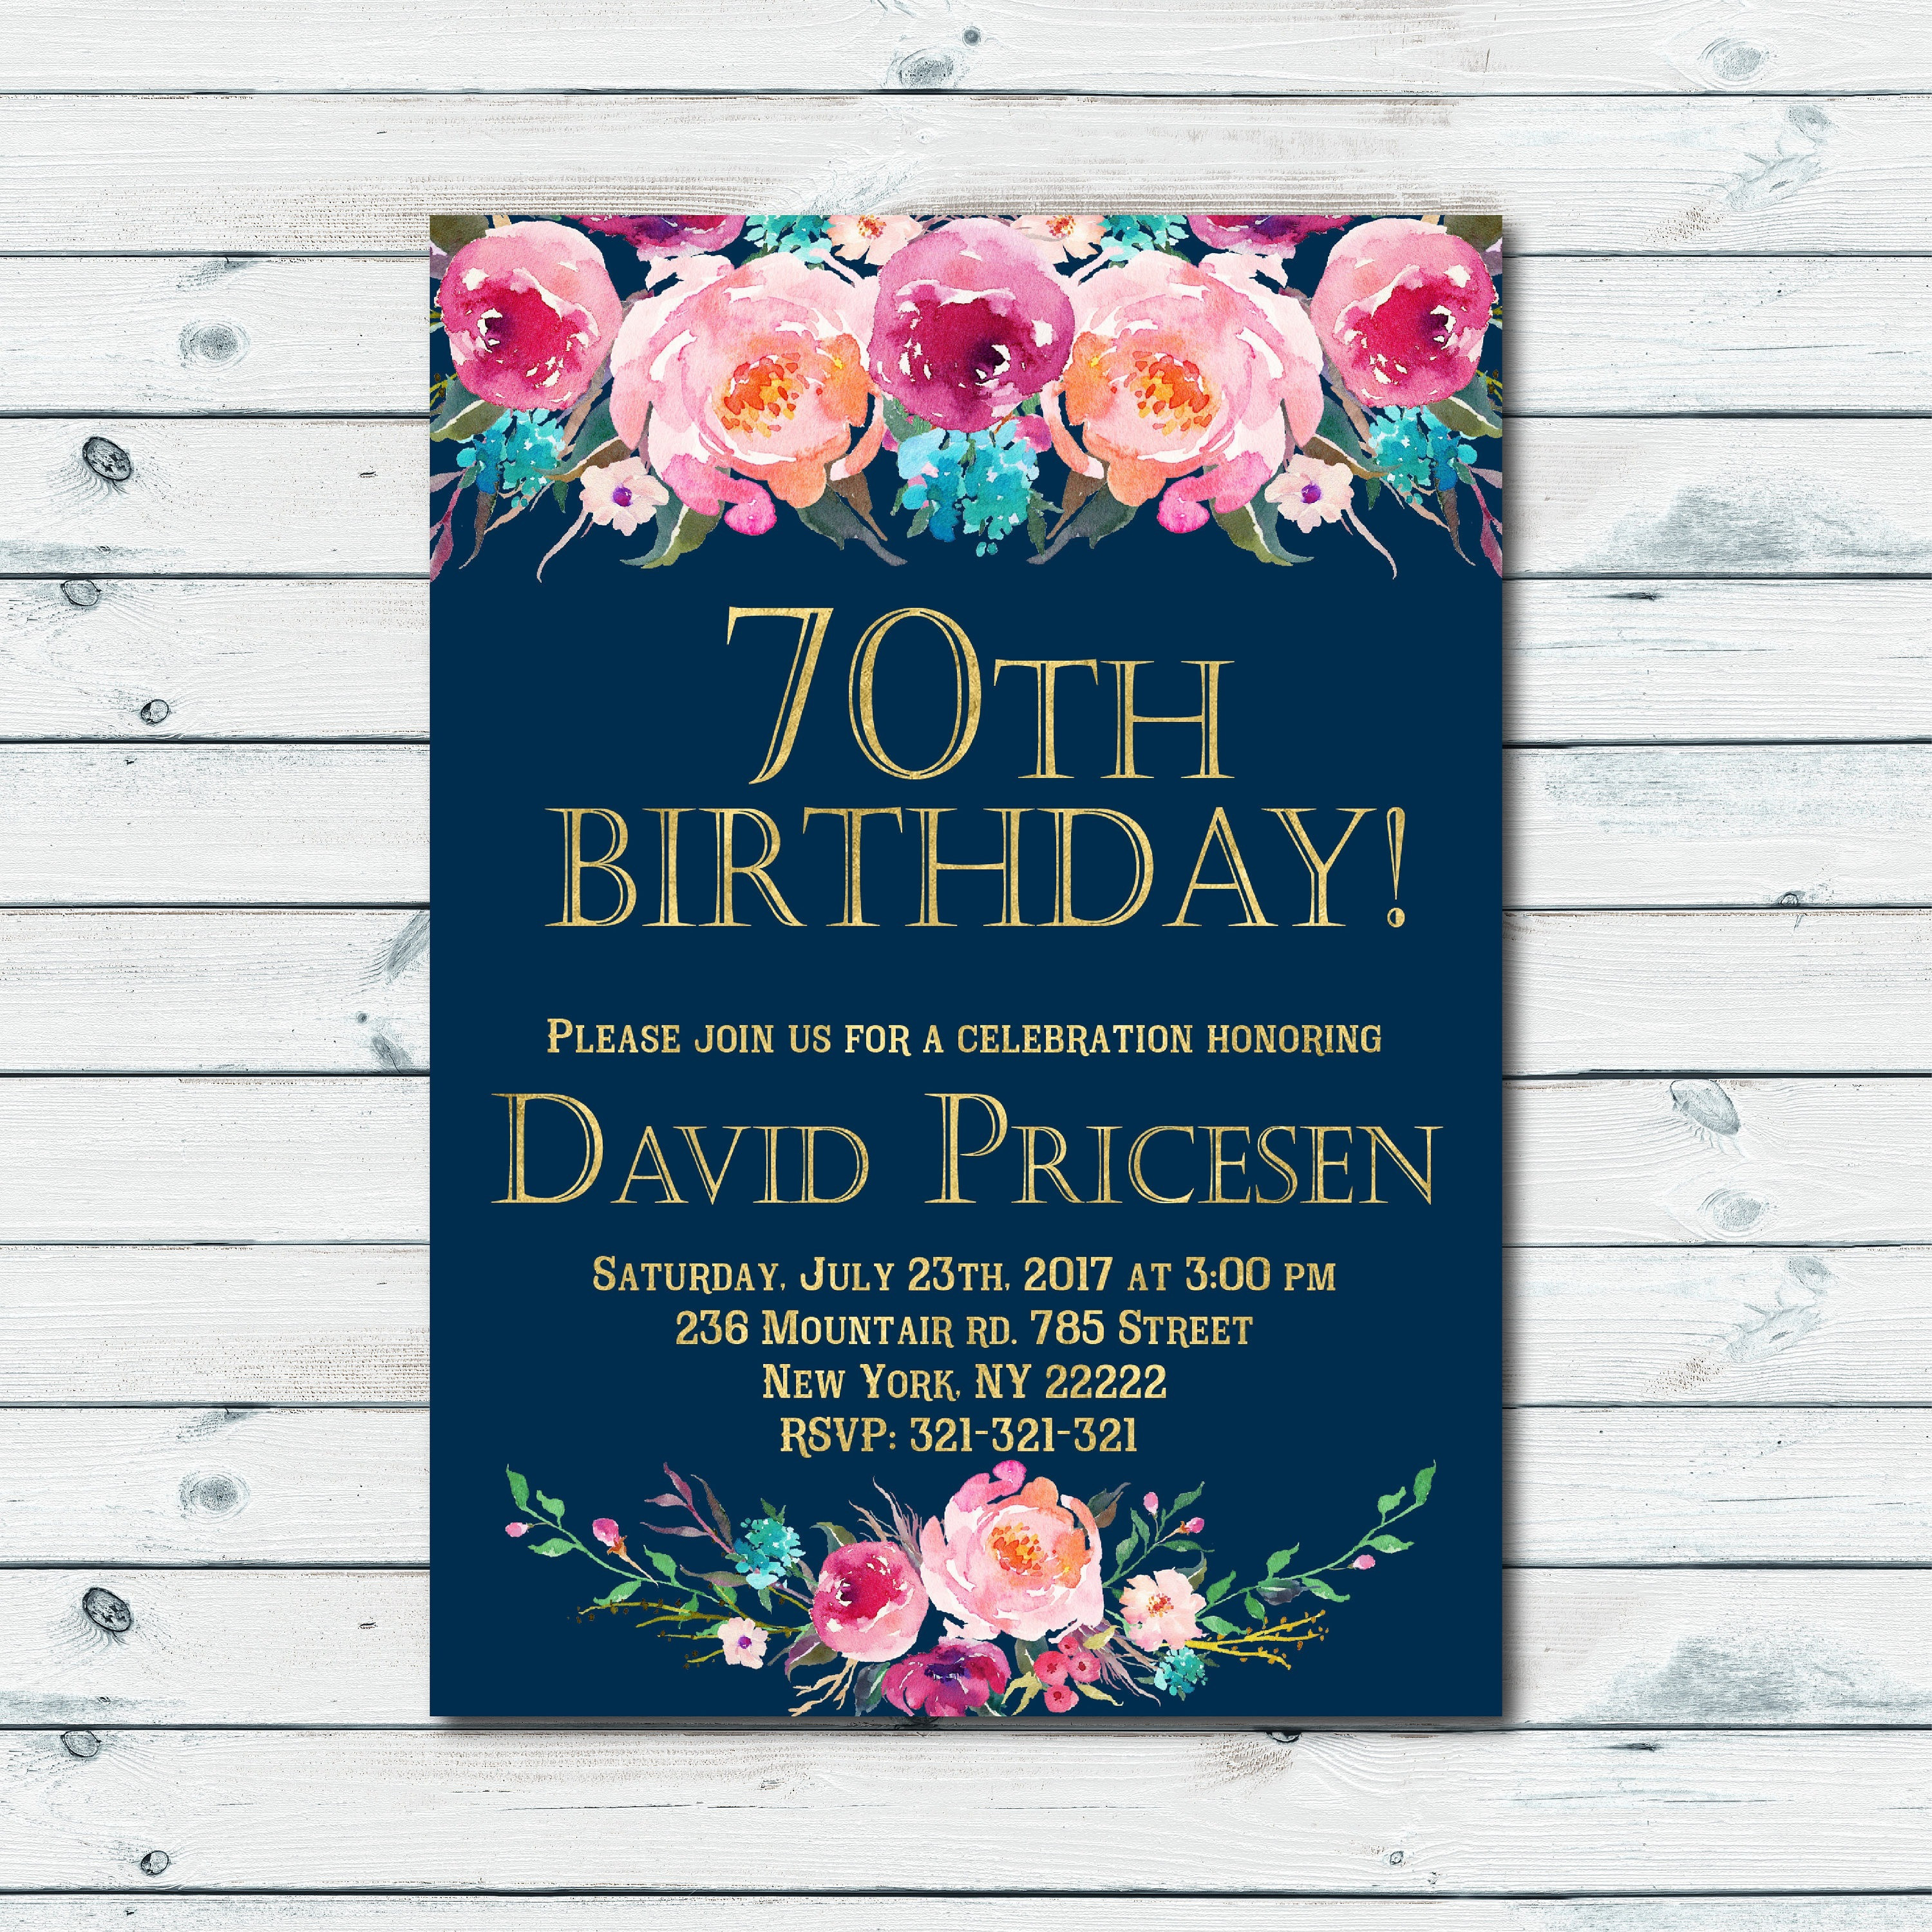 Elegant 70th Birthday Party Invite Template Word High Quality Cheap within size 3000 X 3000